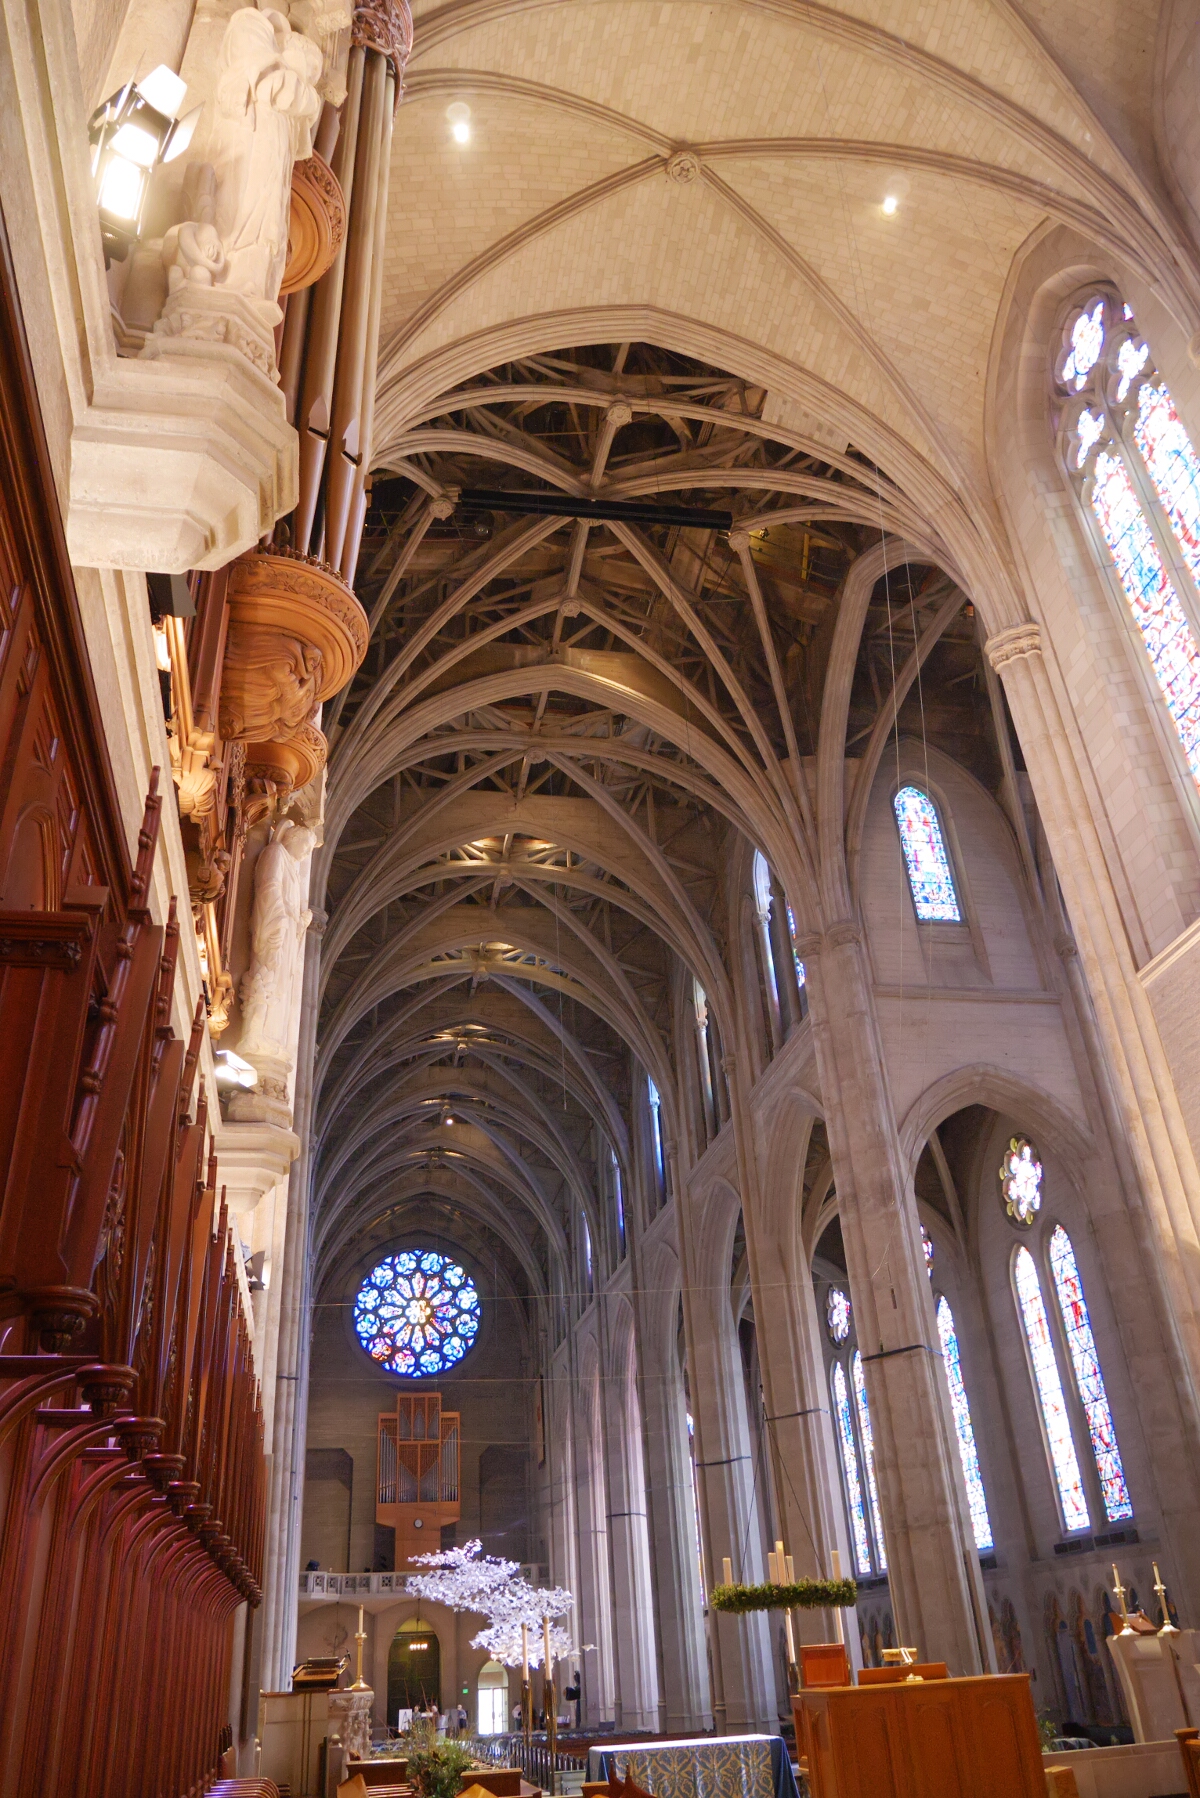 View from the completed choir back into the nave with its incomplete vaults.